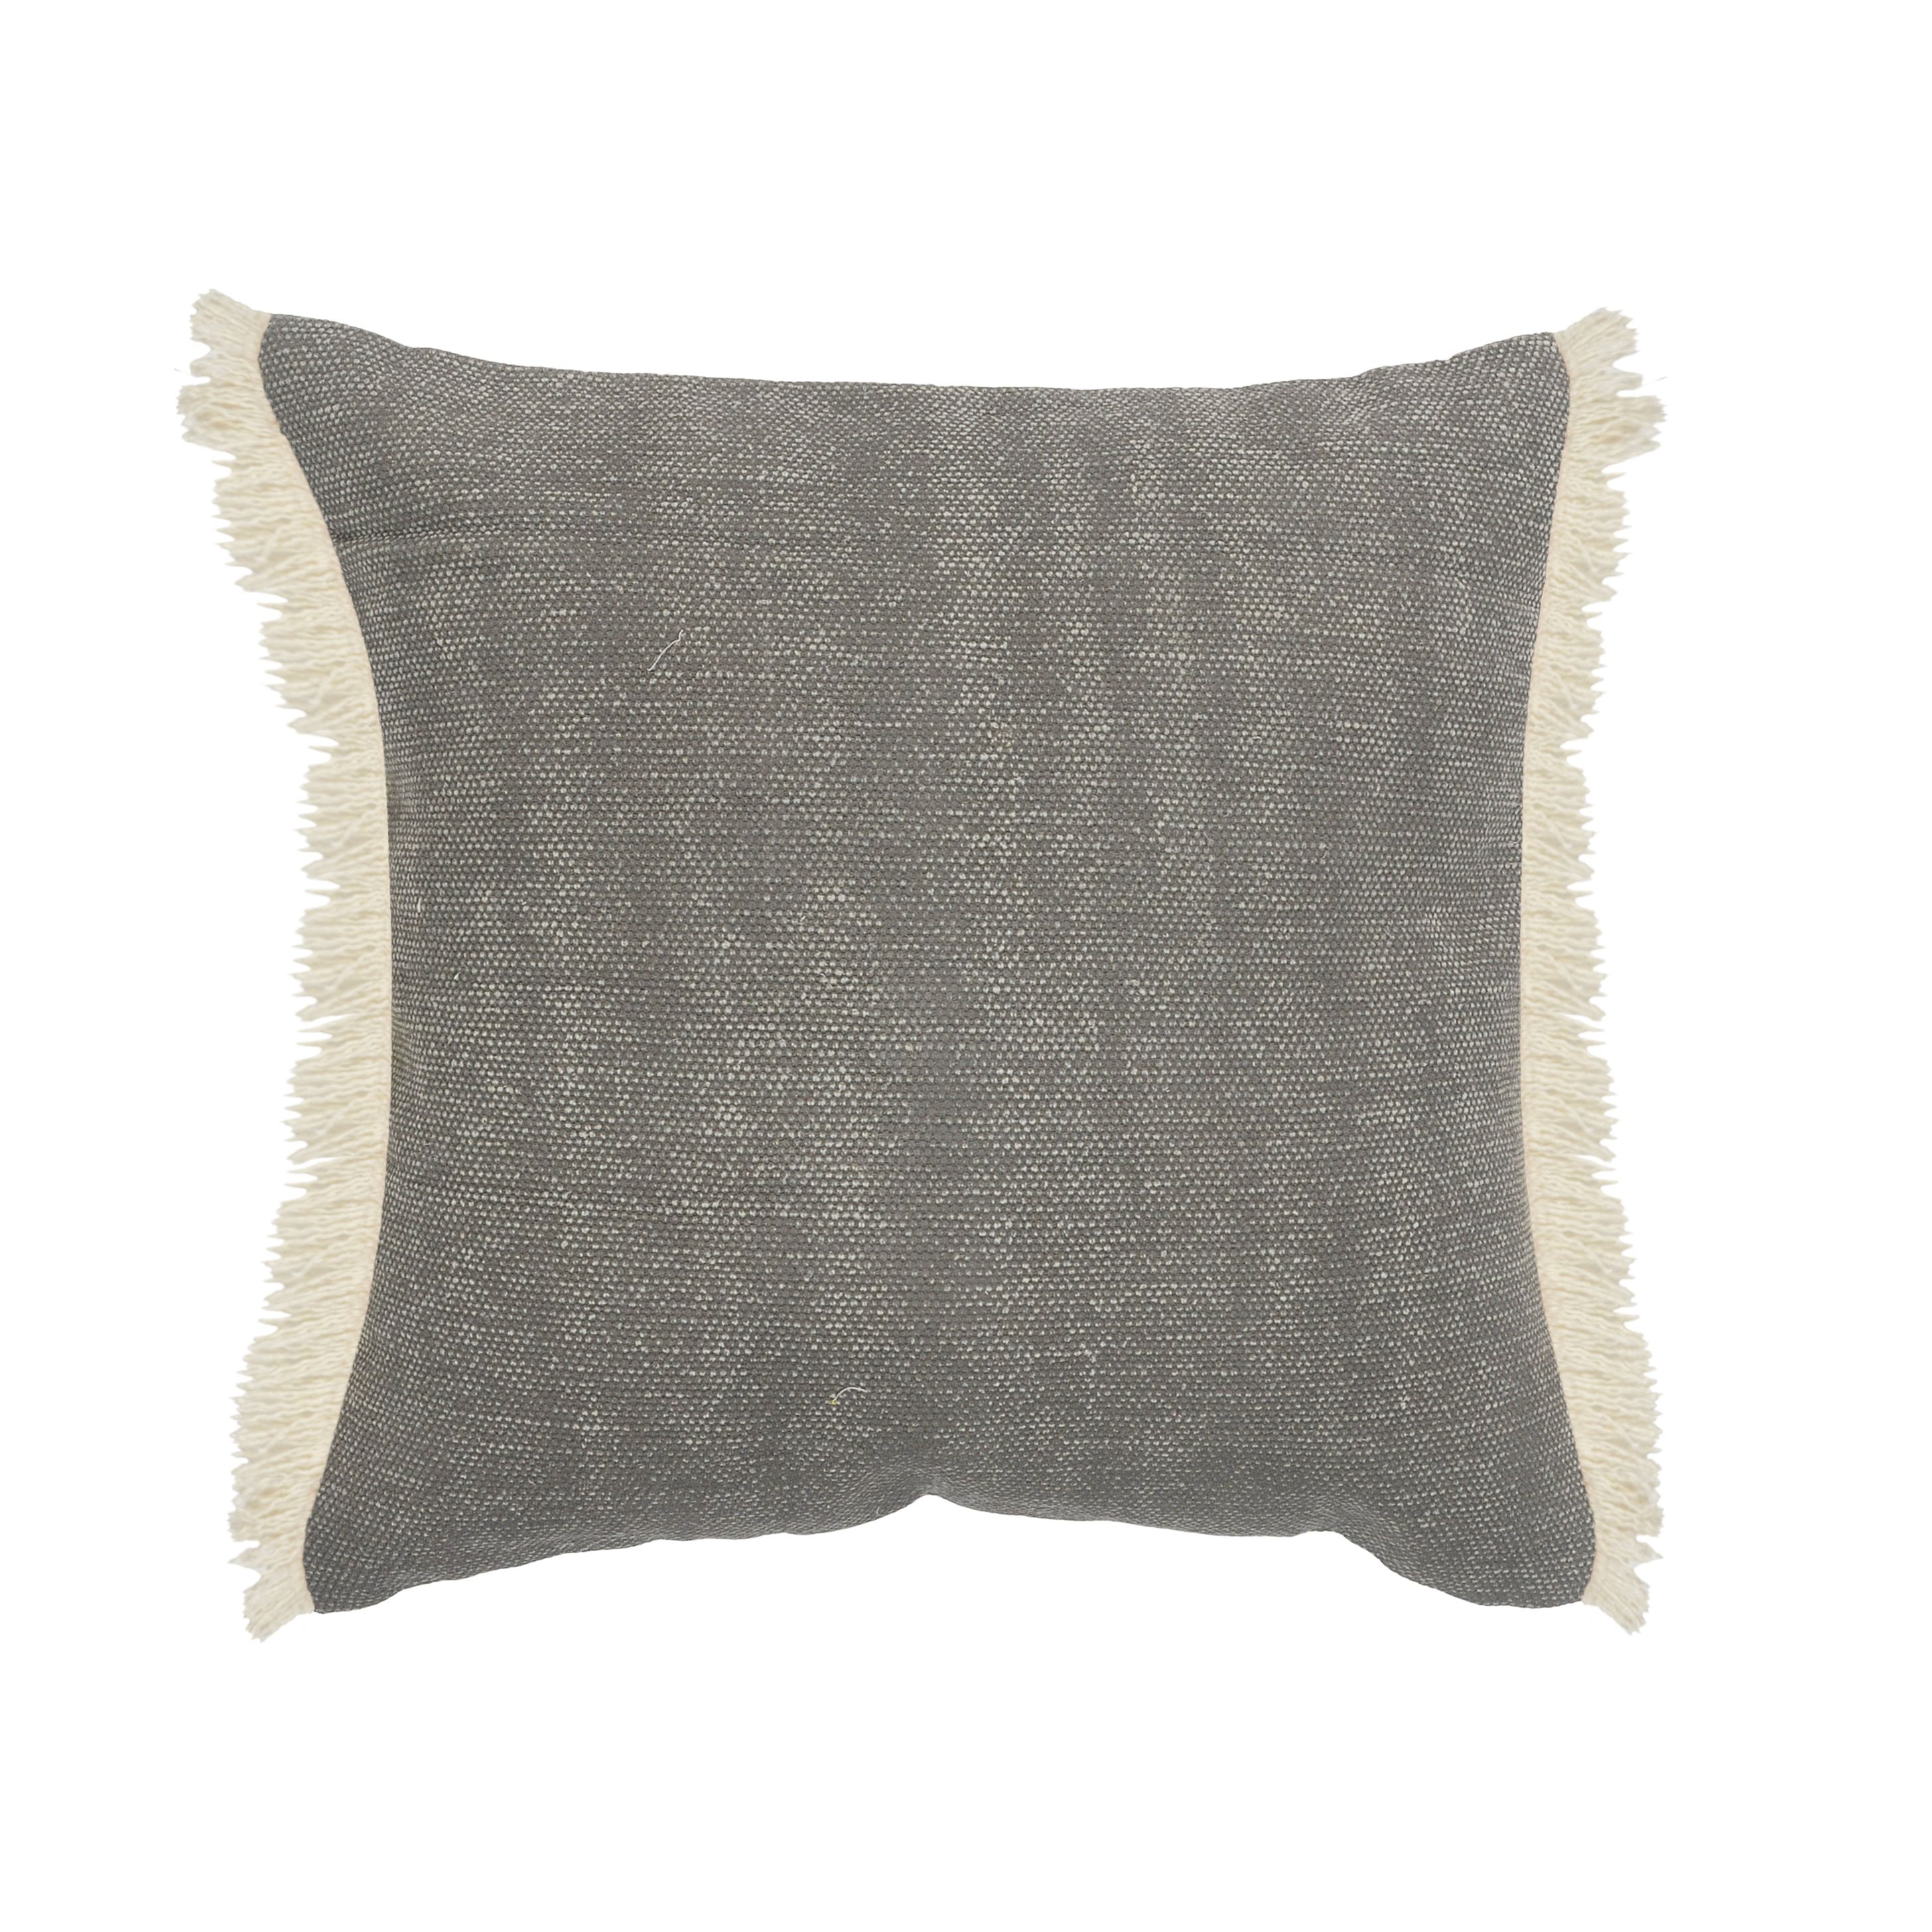 LR Home Charcoal Gray Solid Fringed Throw Pillow, 20 x 20